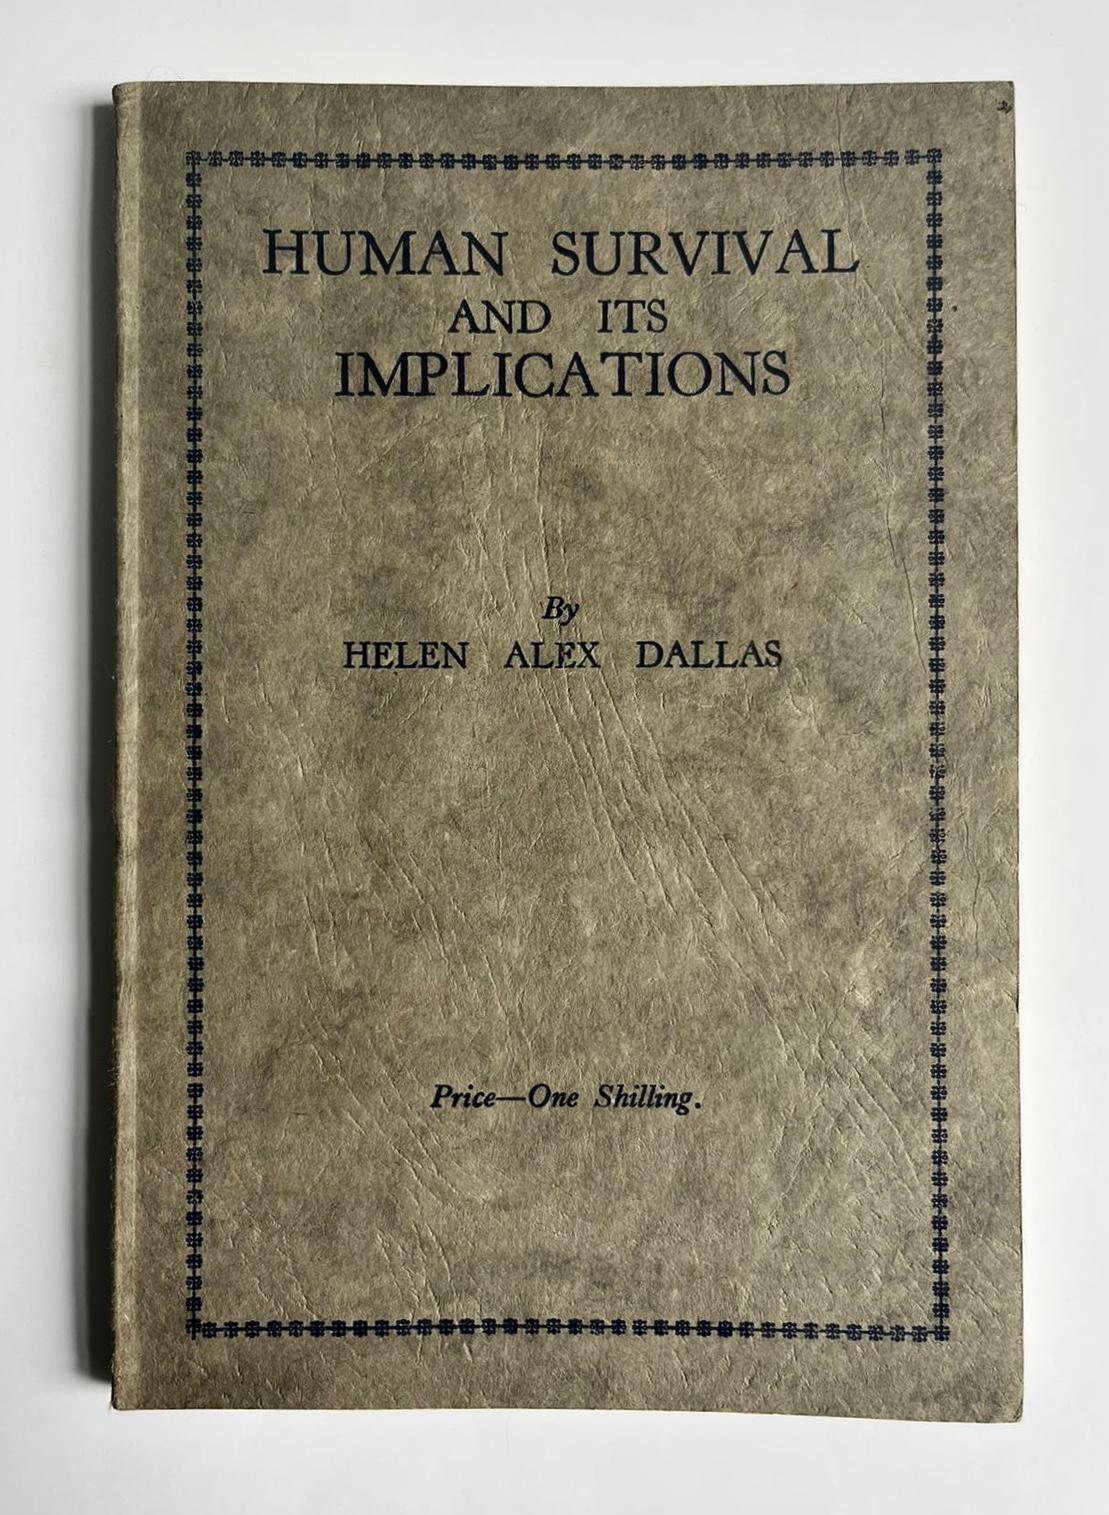 Human Survival and Its Implications by Helen Alex Davies